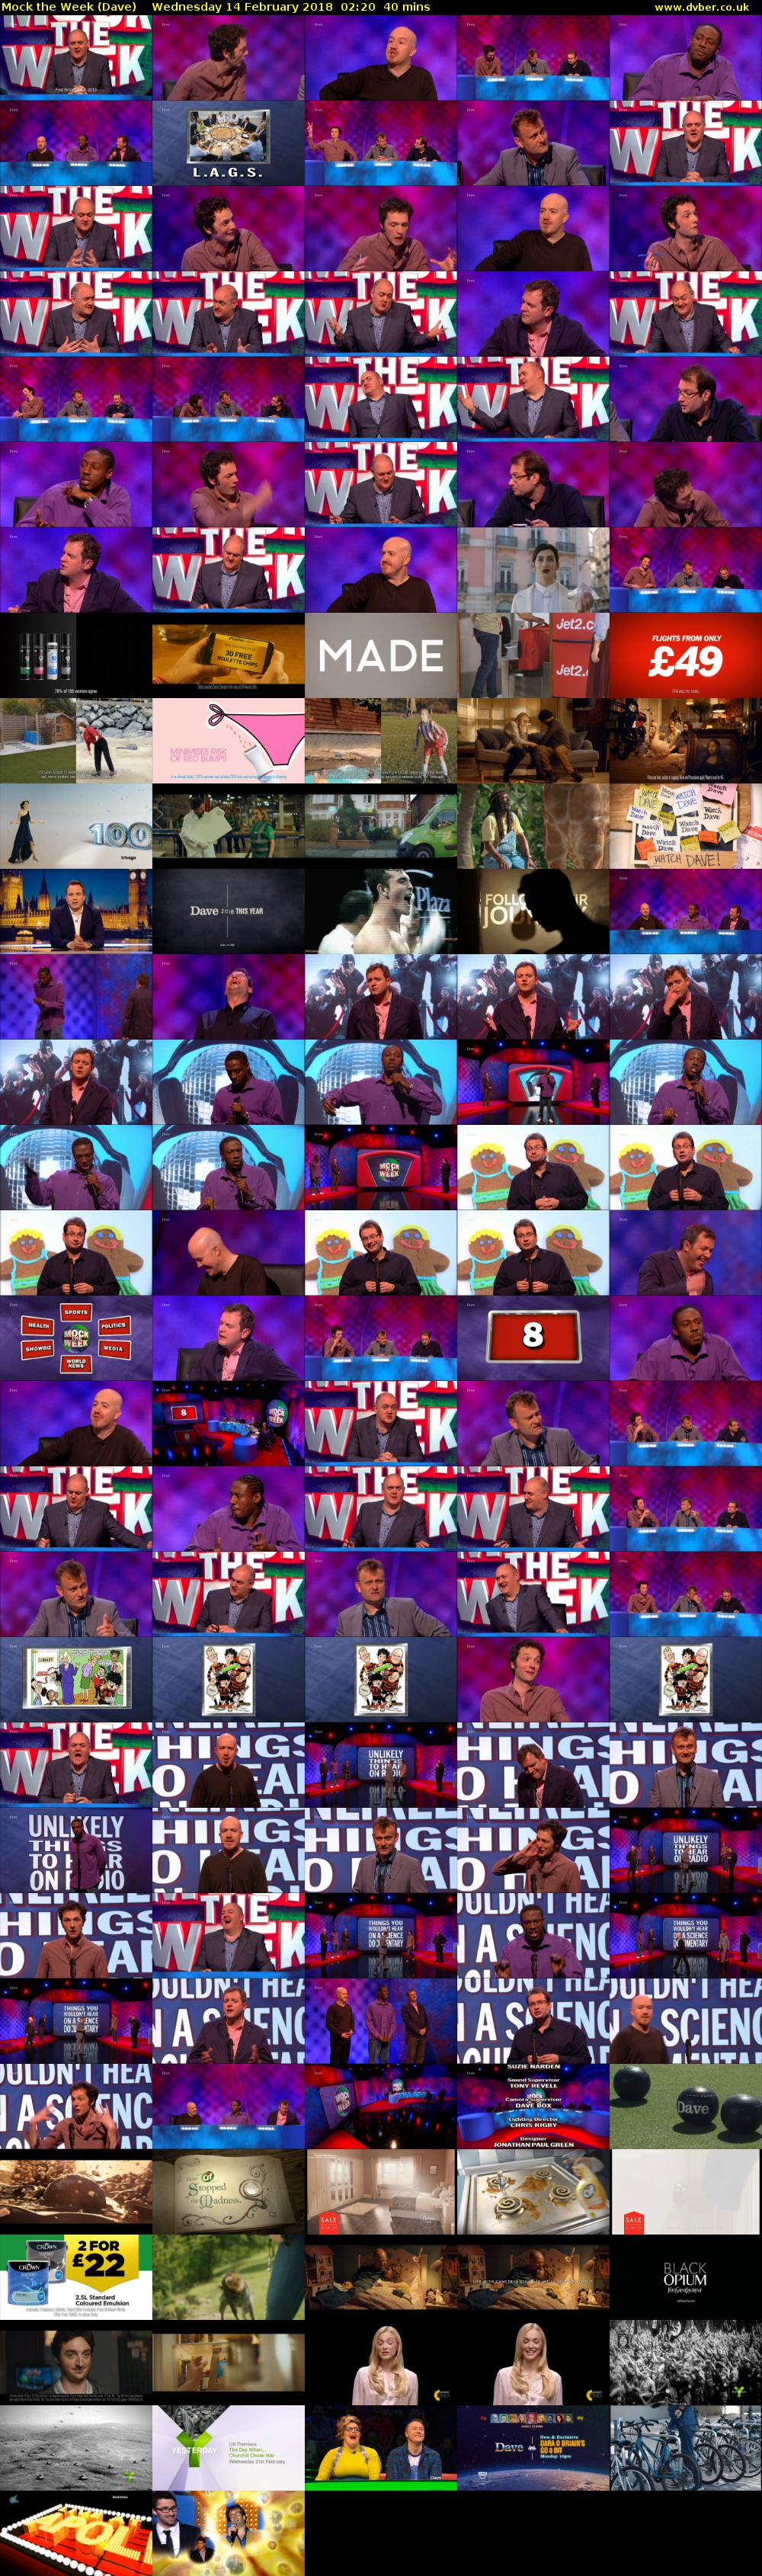 Mock the Week (Dave) Wednesday 14 February 2018 02:20 - 03:00